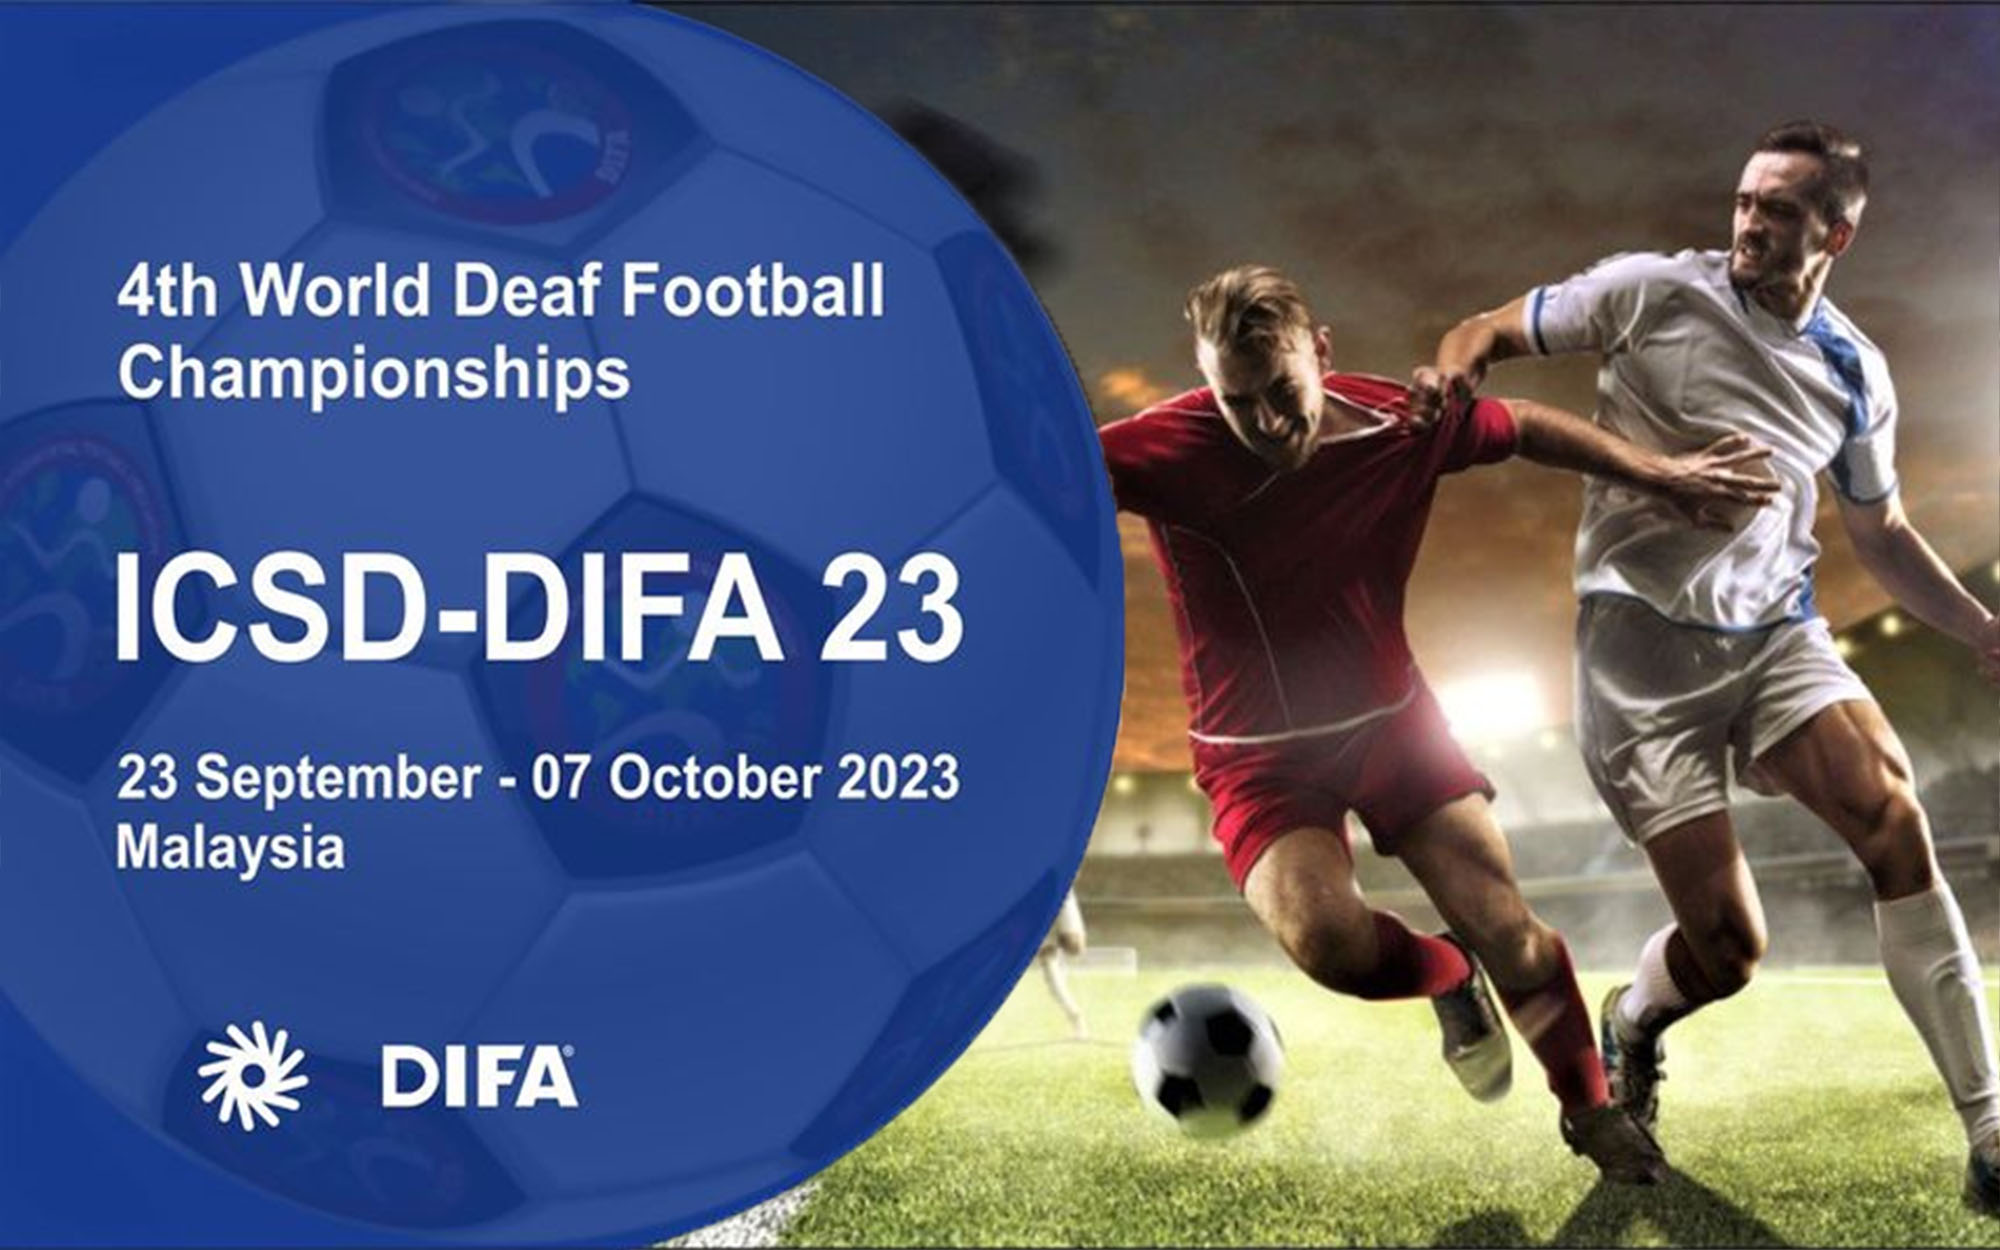 DIFA together with the ICSD, have decided on a new format for the championships and approved it. ……………………………………….